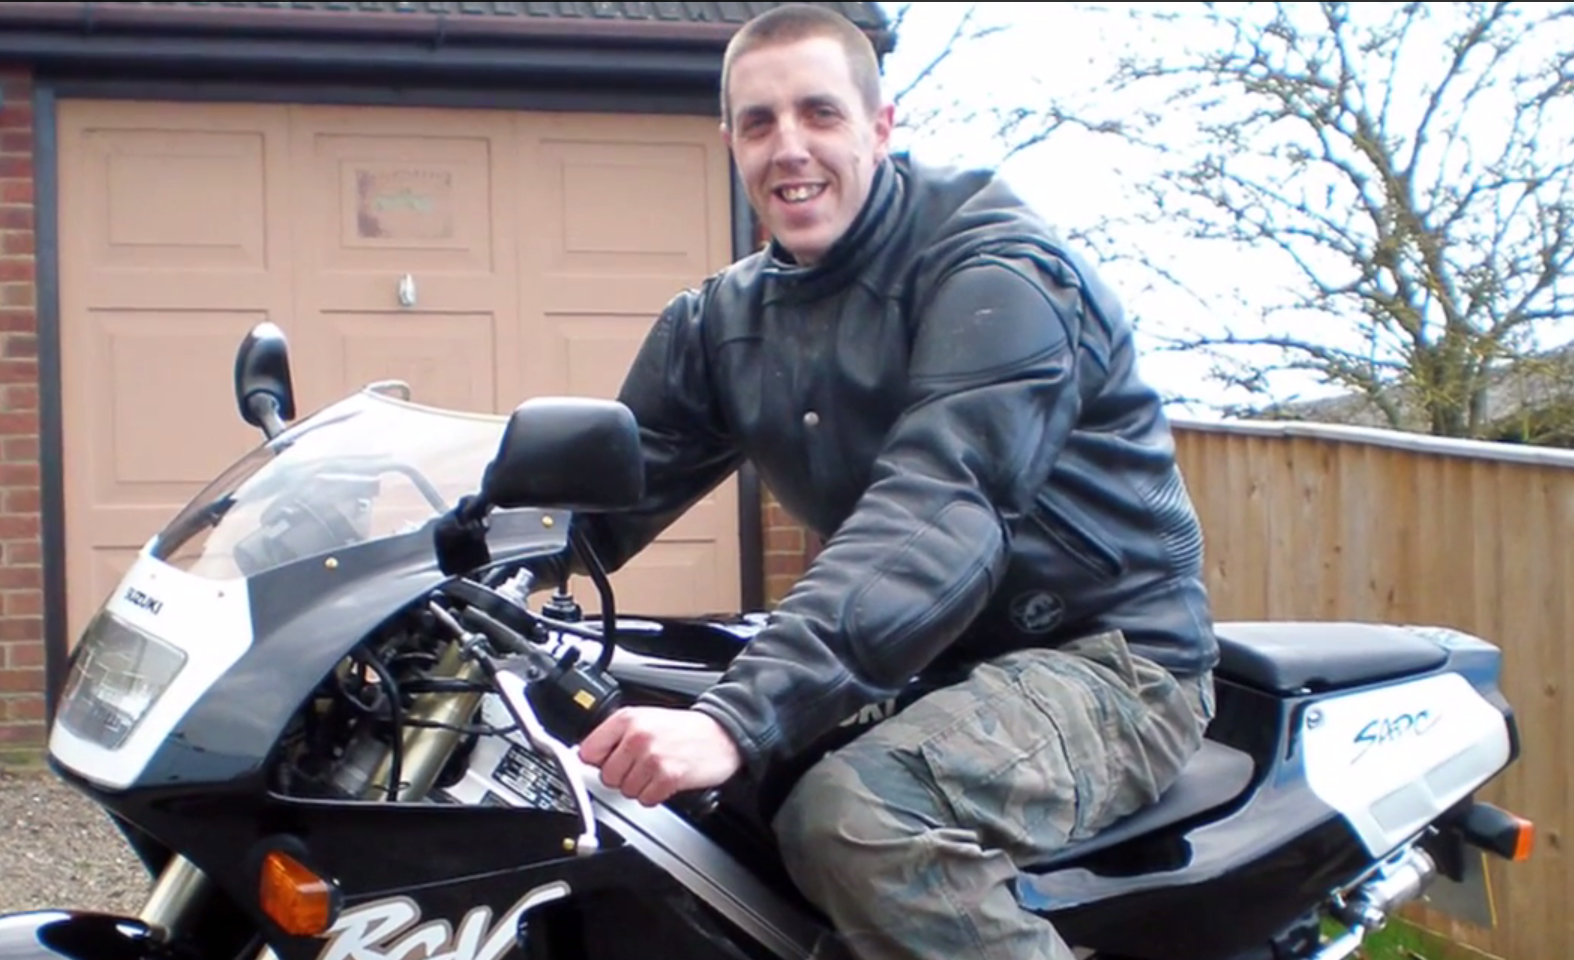 David Holmes was killed in a motorbike accident last June